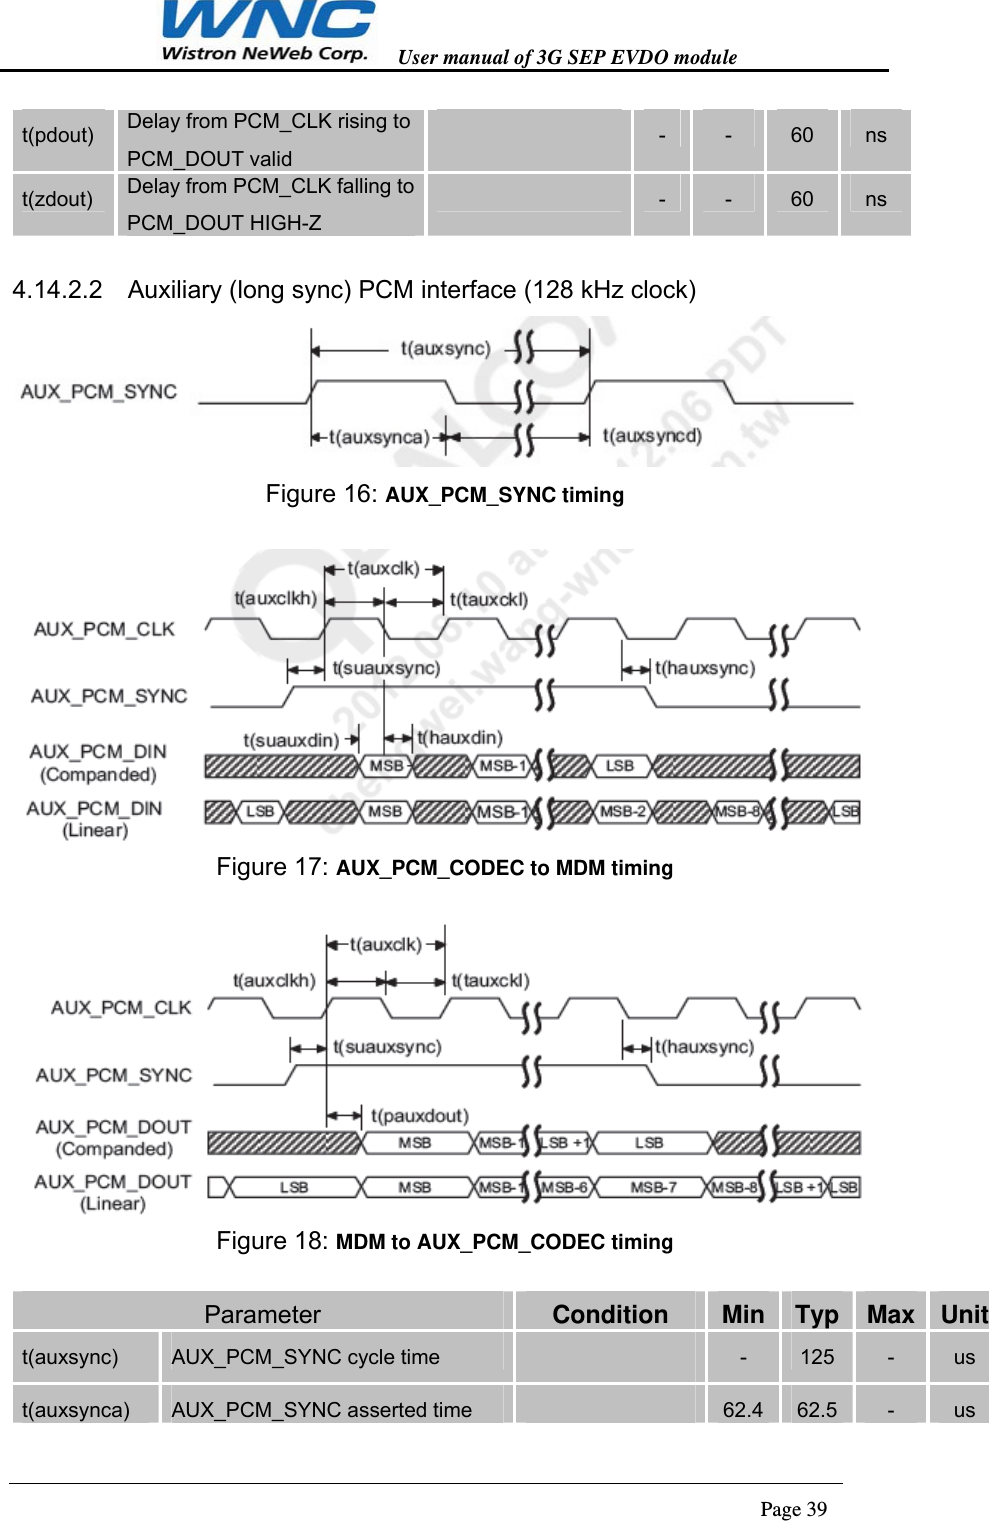   User manual of 3G SEP EVDO module                                                                      Page 39  t(pdout)  Delay from PCM_CLK rising toPCM_DOUT valid  -  -  60  ns t(zdout)  Delay from PCM_CLK falling toPCM_DOUT HIGH-Z  -  -  60  ns  4.14.2.2  Auxiliary (long sync) PCM interface (128 kHz clock)  Figure 16: AUX_PCM_SYNC timing   Figure 17: AUX_PCM_CODEC to MDM timing   Figure 18: MDM to AUX_PCM_CODEC timing  Parameter  Condition Min Typ Max Unitt(auxsync)  AUX_PCM_SYNC cycle time   -  125  -  us t(auxsynca)  AUX_PCM_SYNC asserted time   62.4  62.5  -  us 